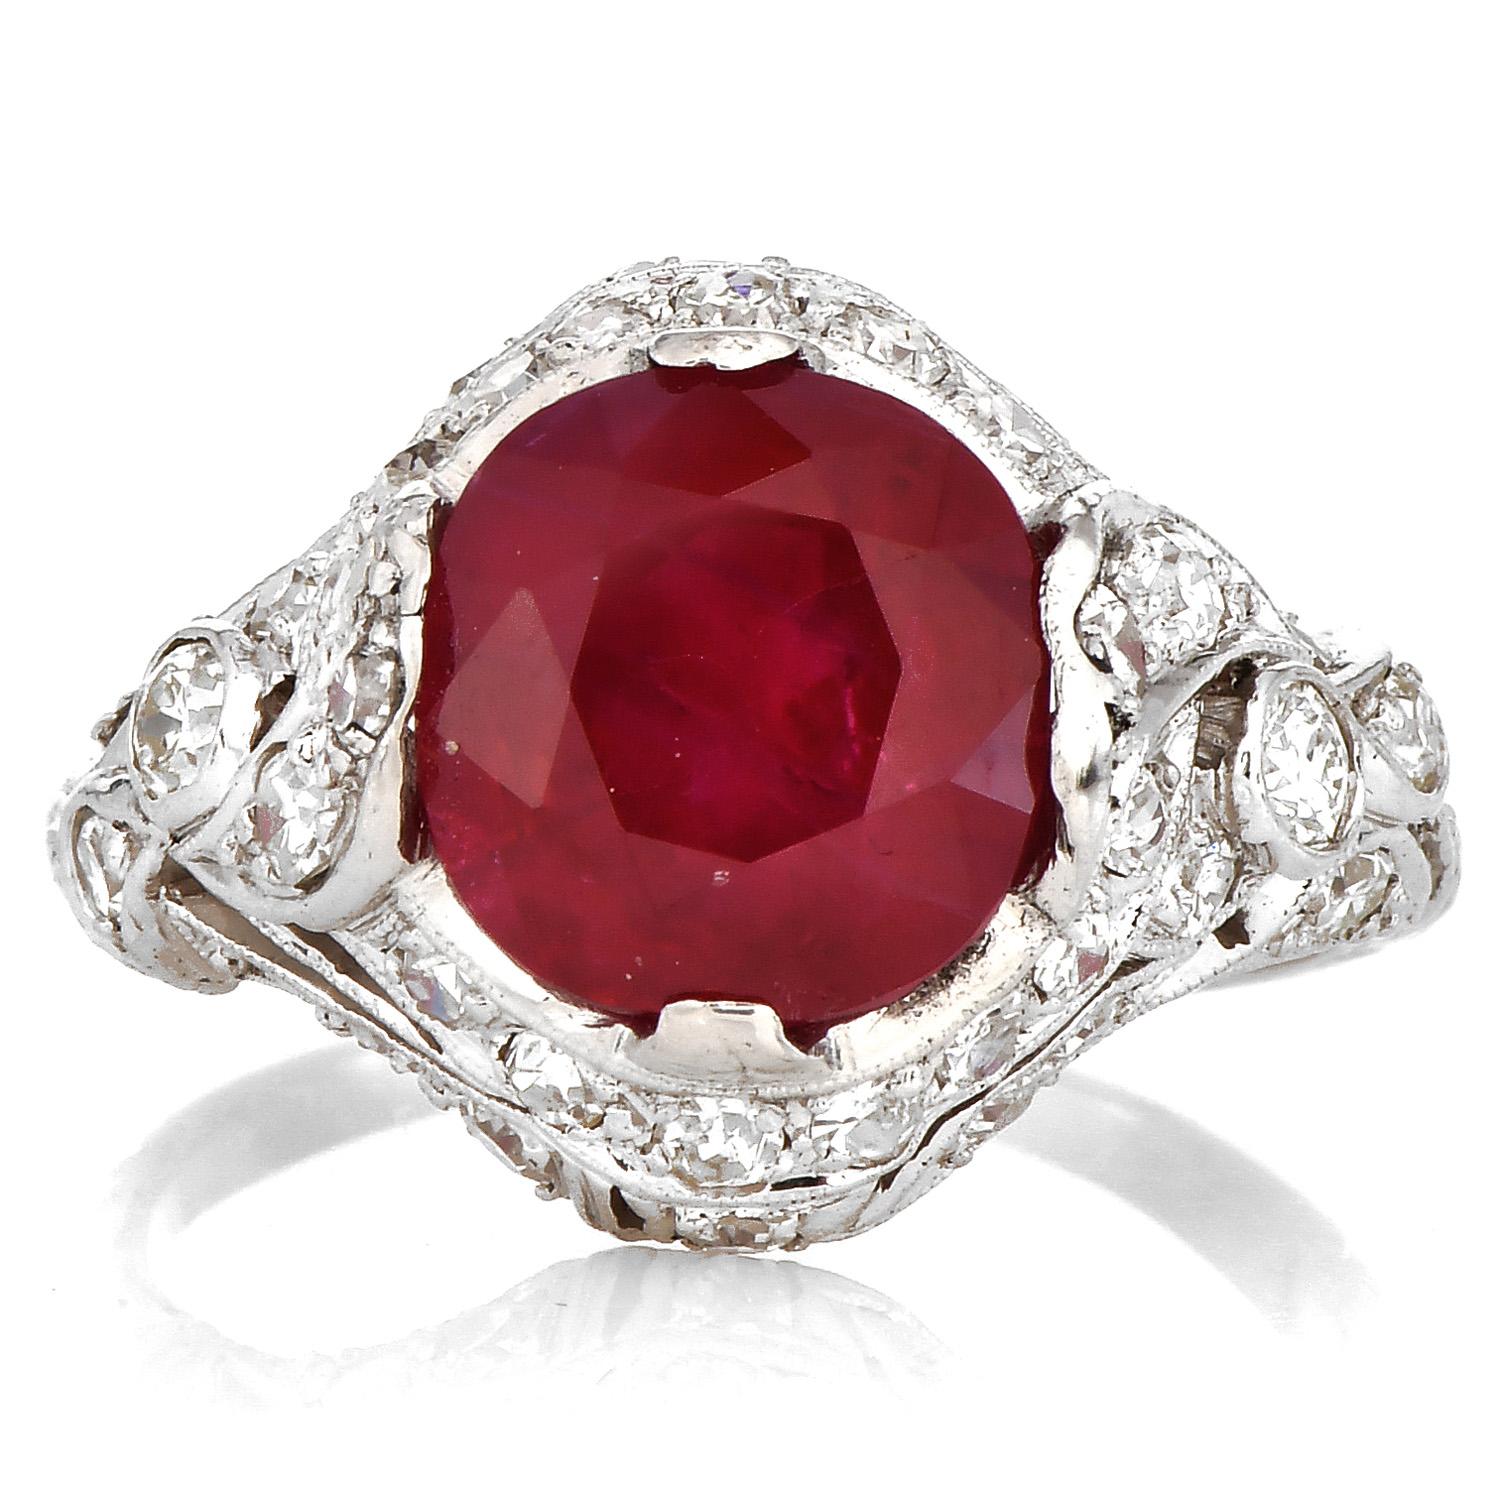 GIA 4.06 Ct Burma Ruby Diamond Platinum Antique Cocktail Ring In Excellent Condition For Sale In Miami, FL